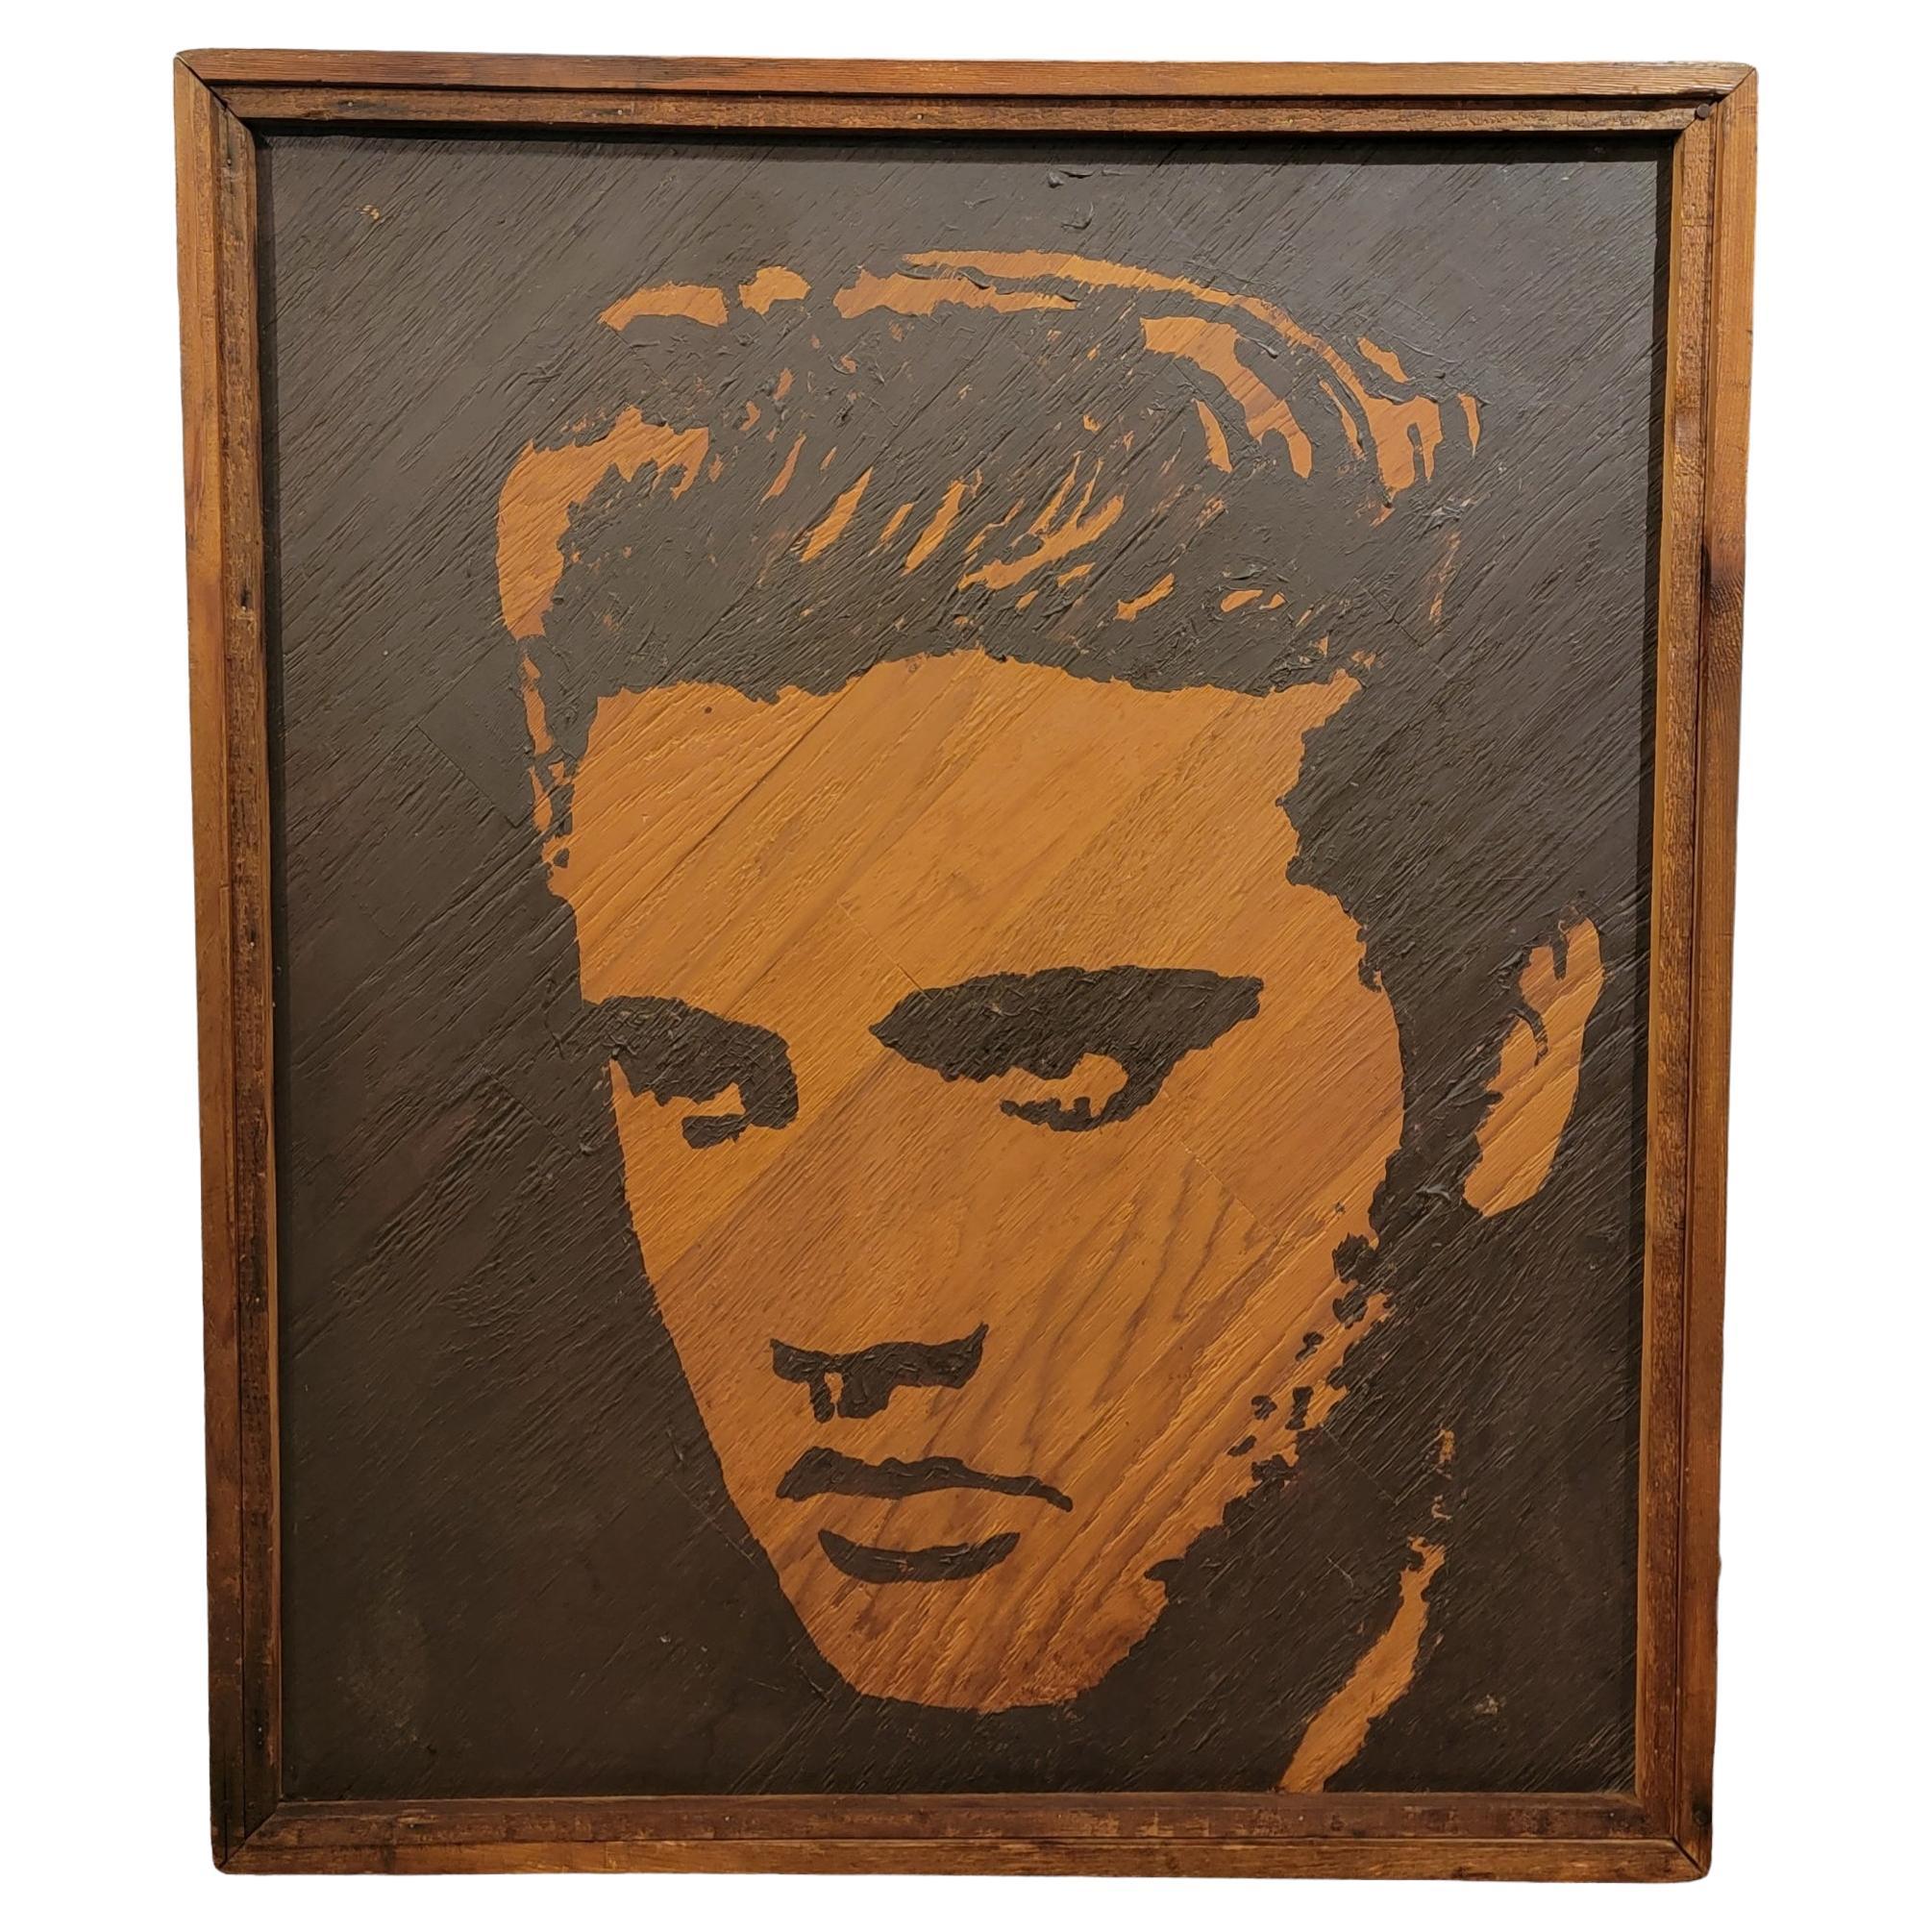 Hand Painted Sign Sillhouette of Elvis Presley